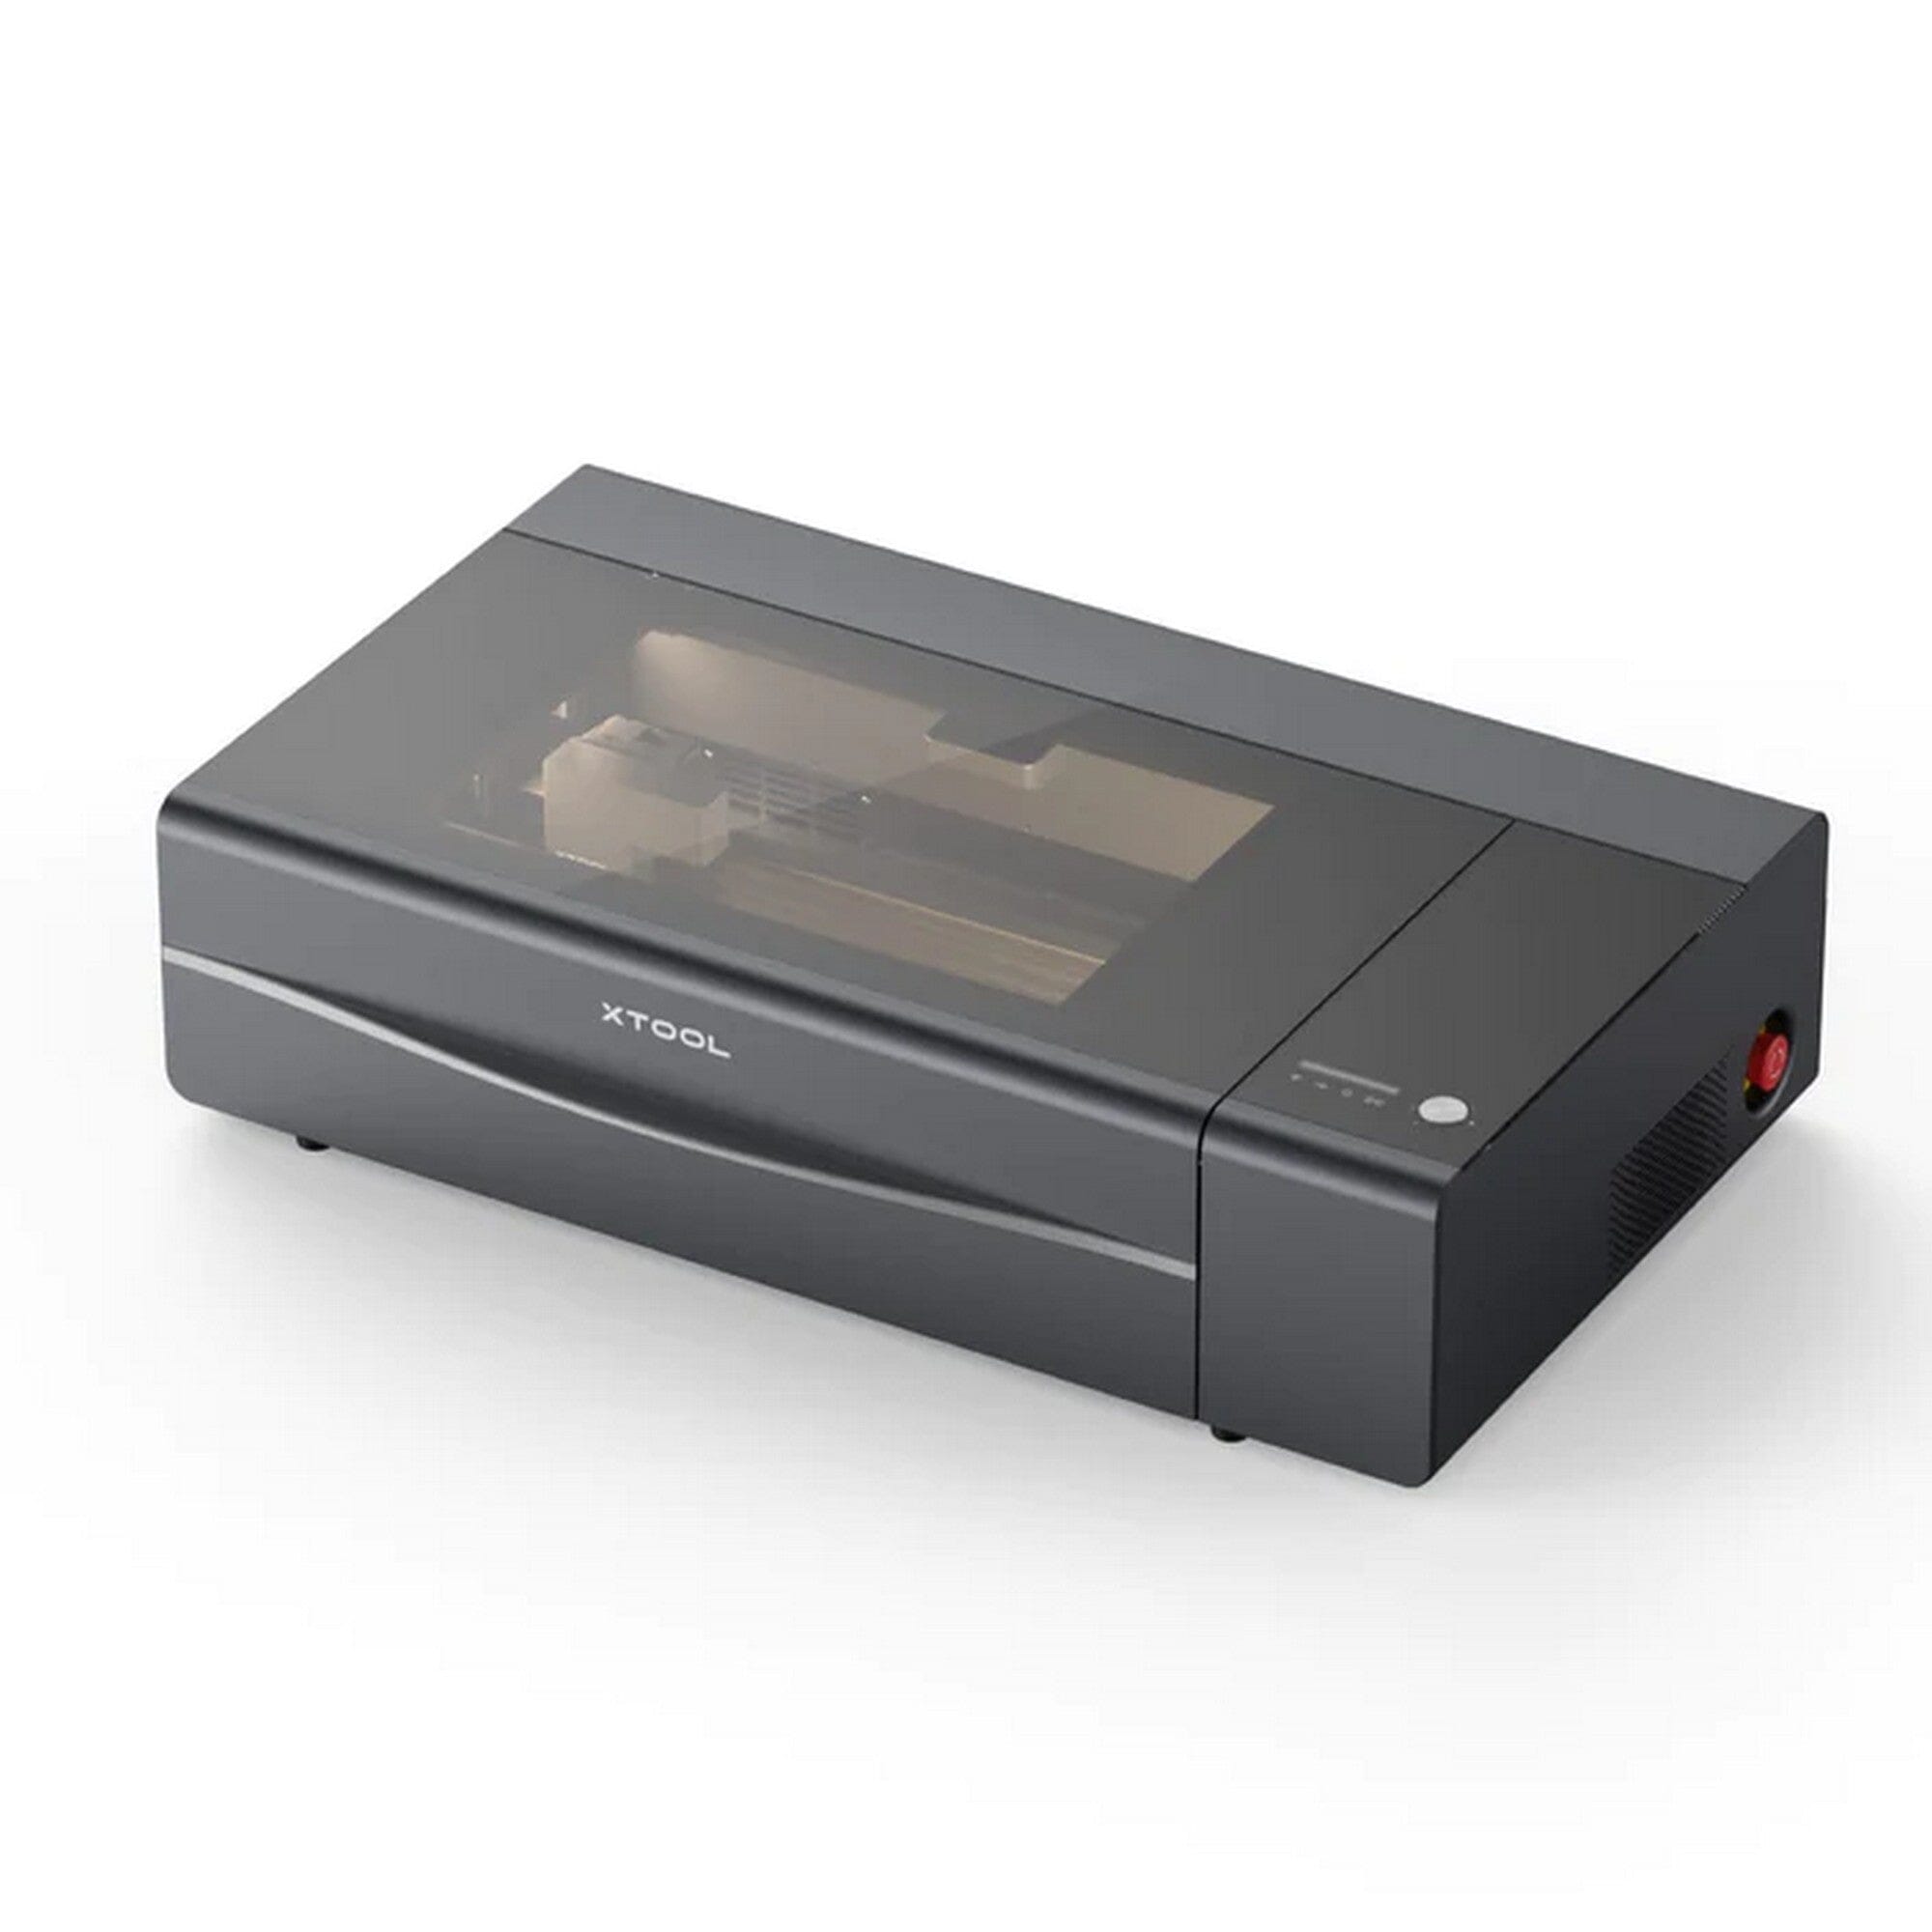 xTool M1 Smart Laser Engraver and Vinyl Cutter, Smart Desktop Laser Cutter  and Engraver, xTool